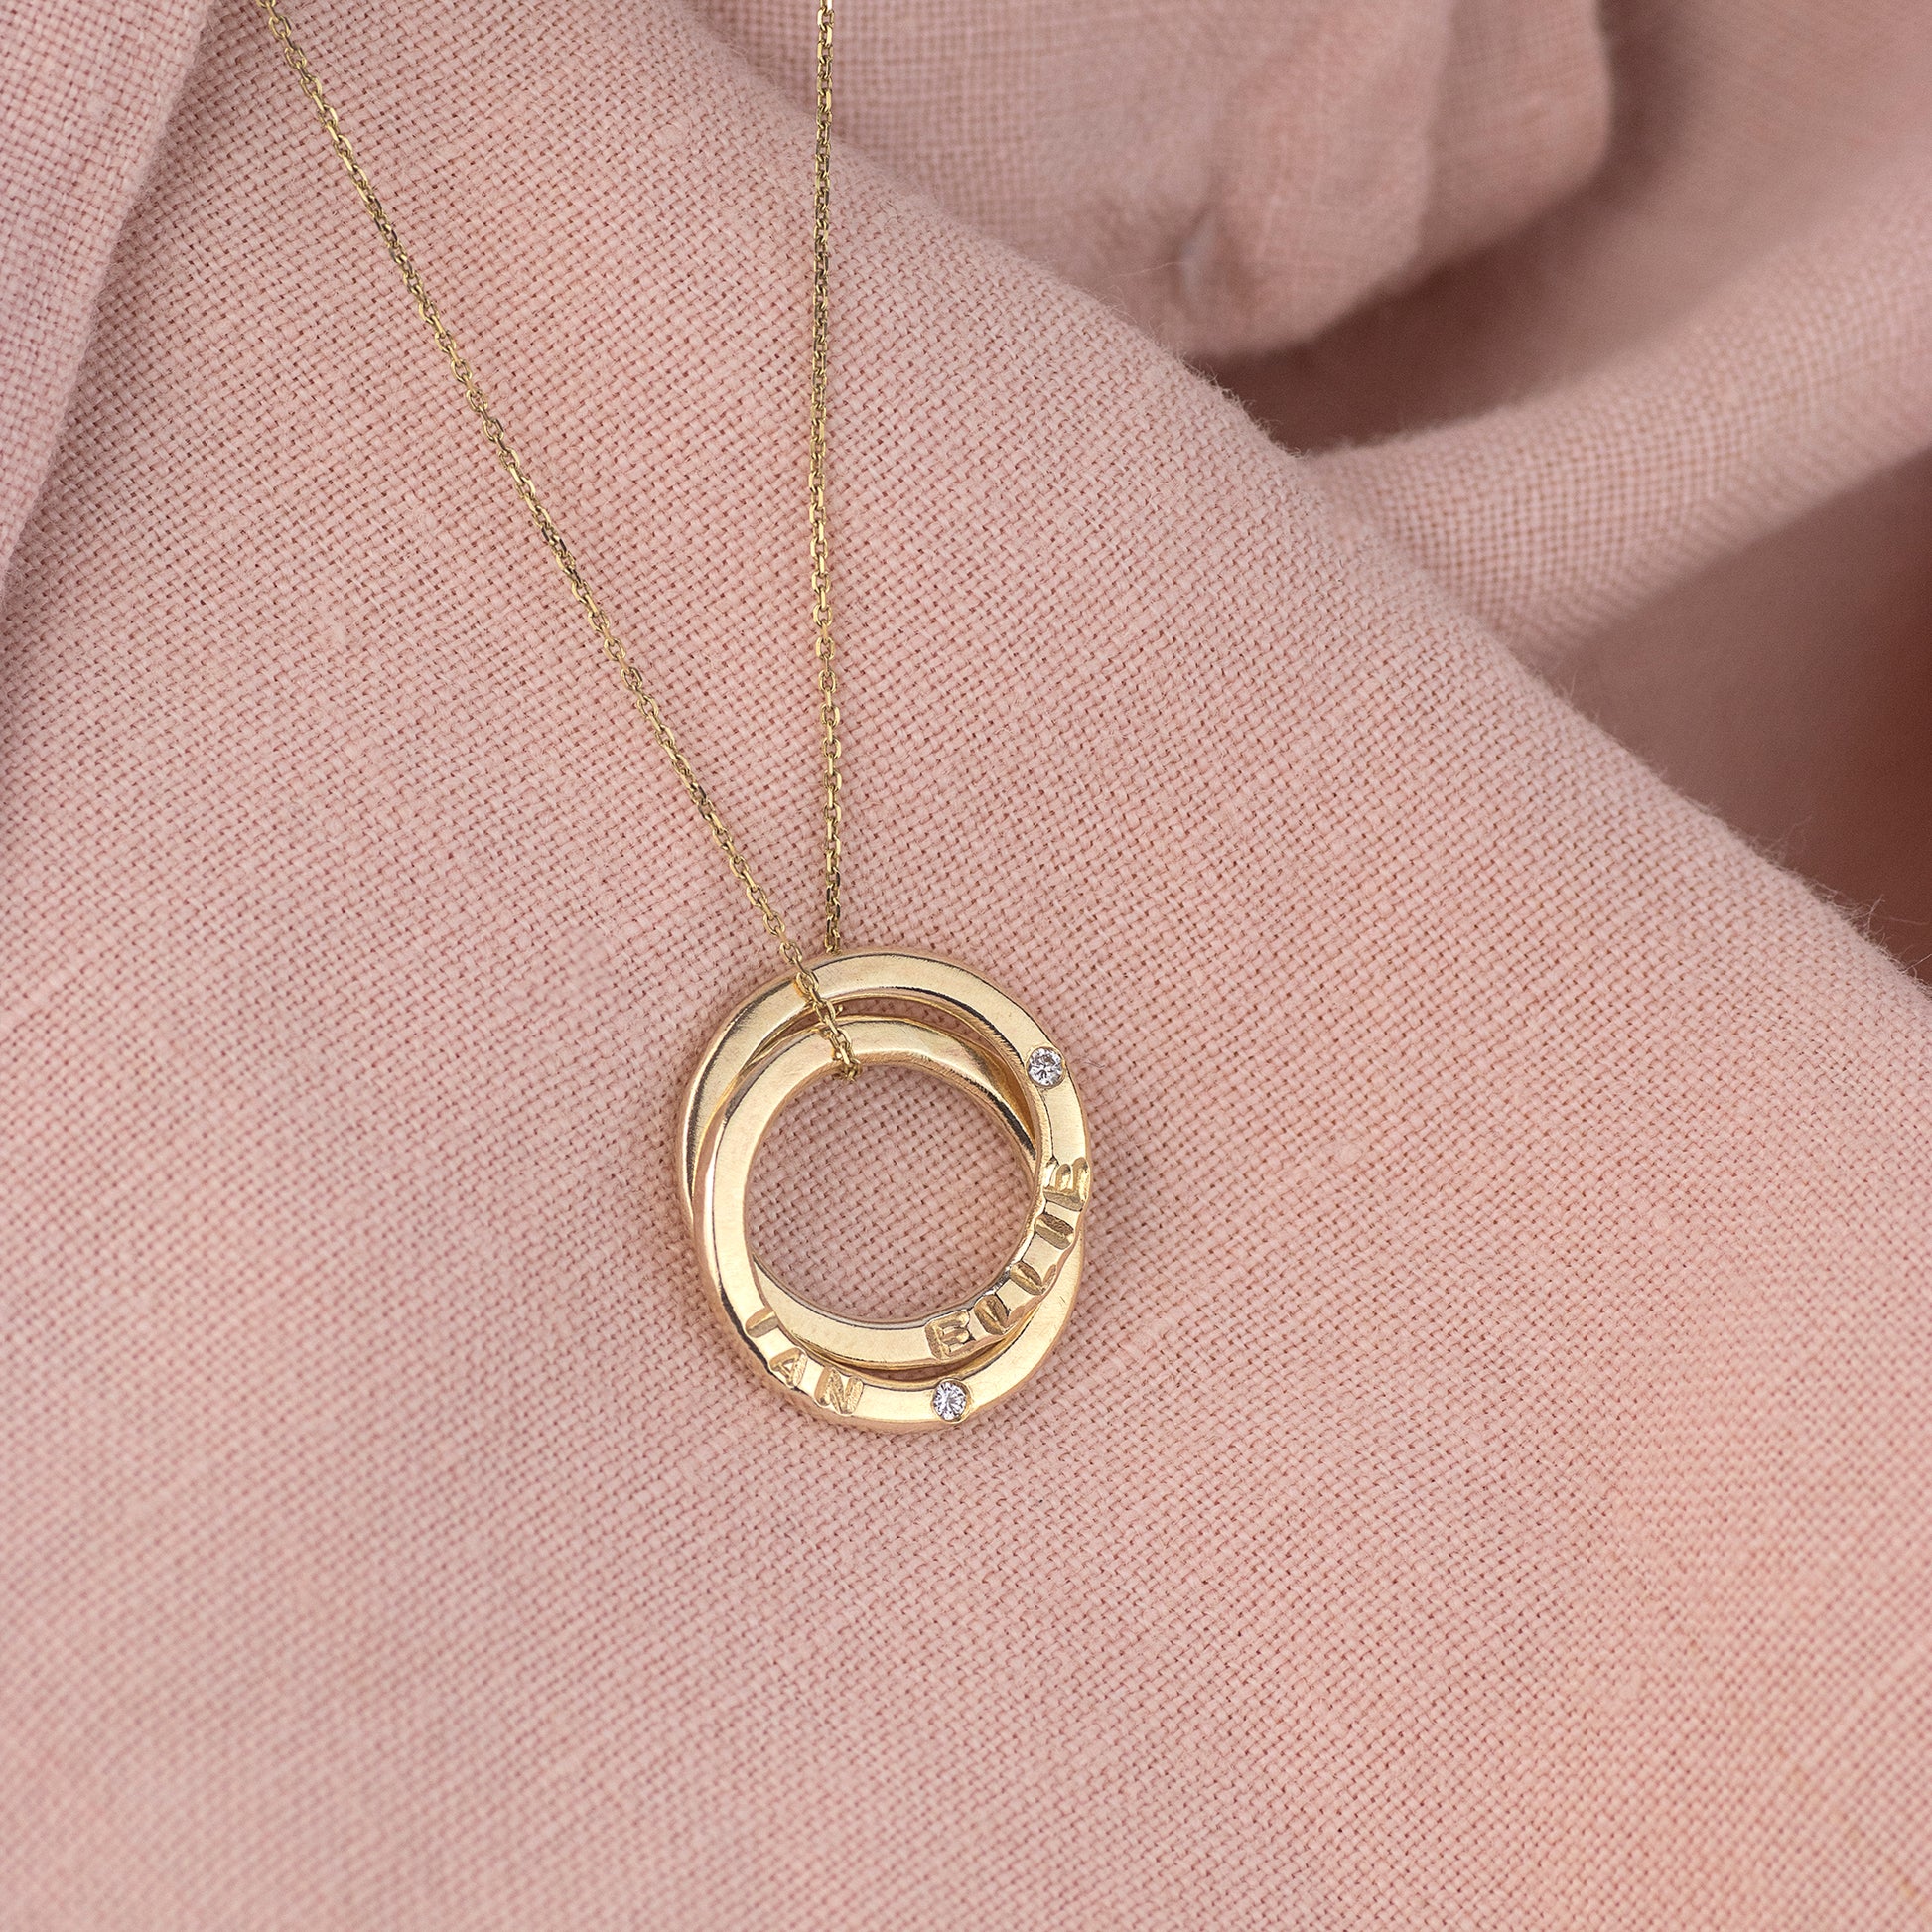 Personalised 9kt Gold Double Link Name Necklace with Diamonds